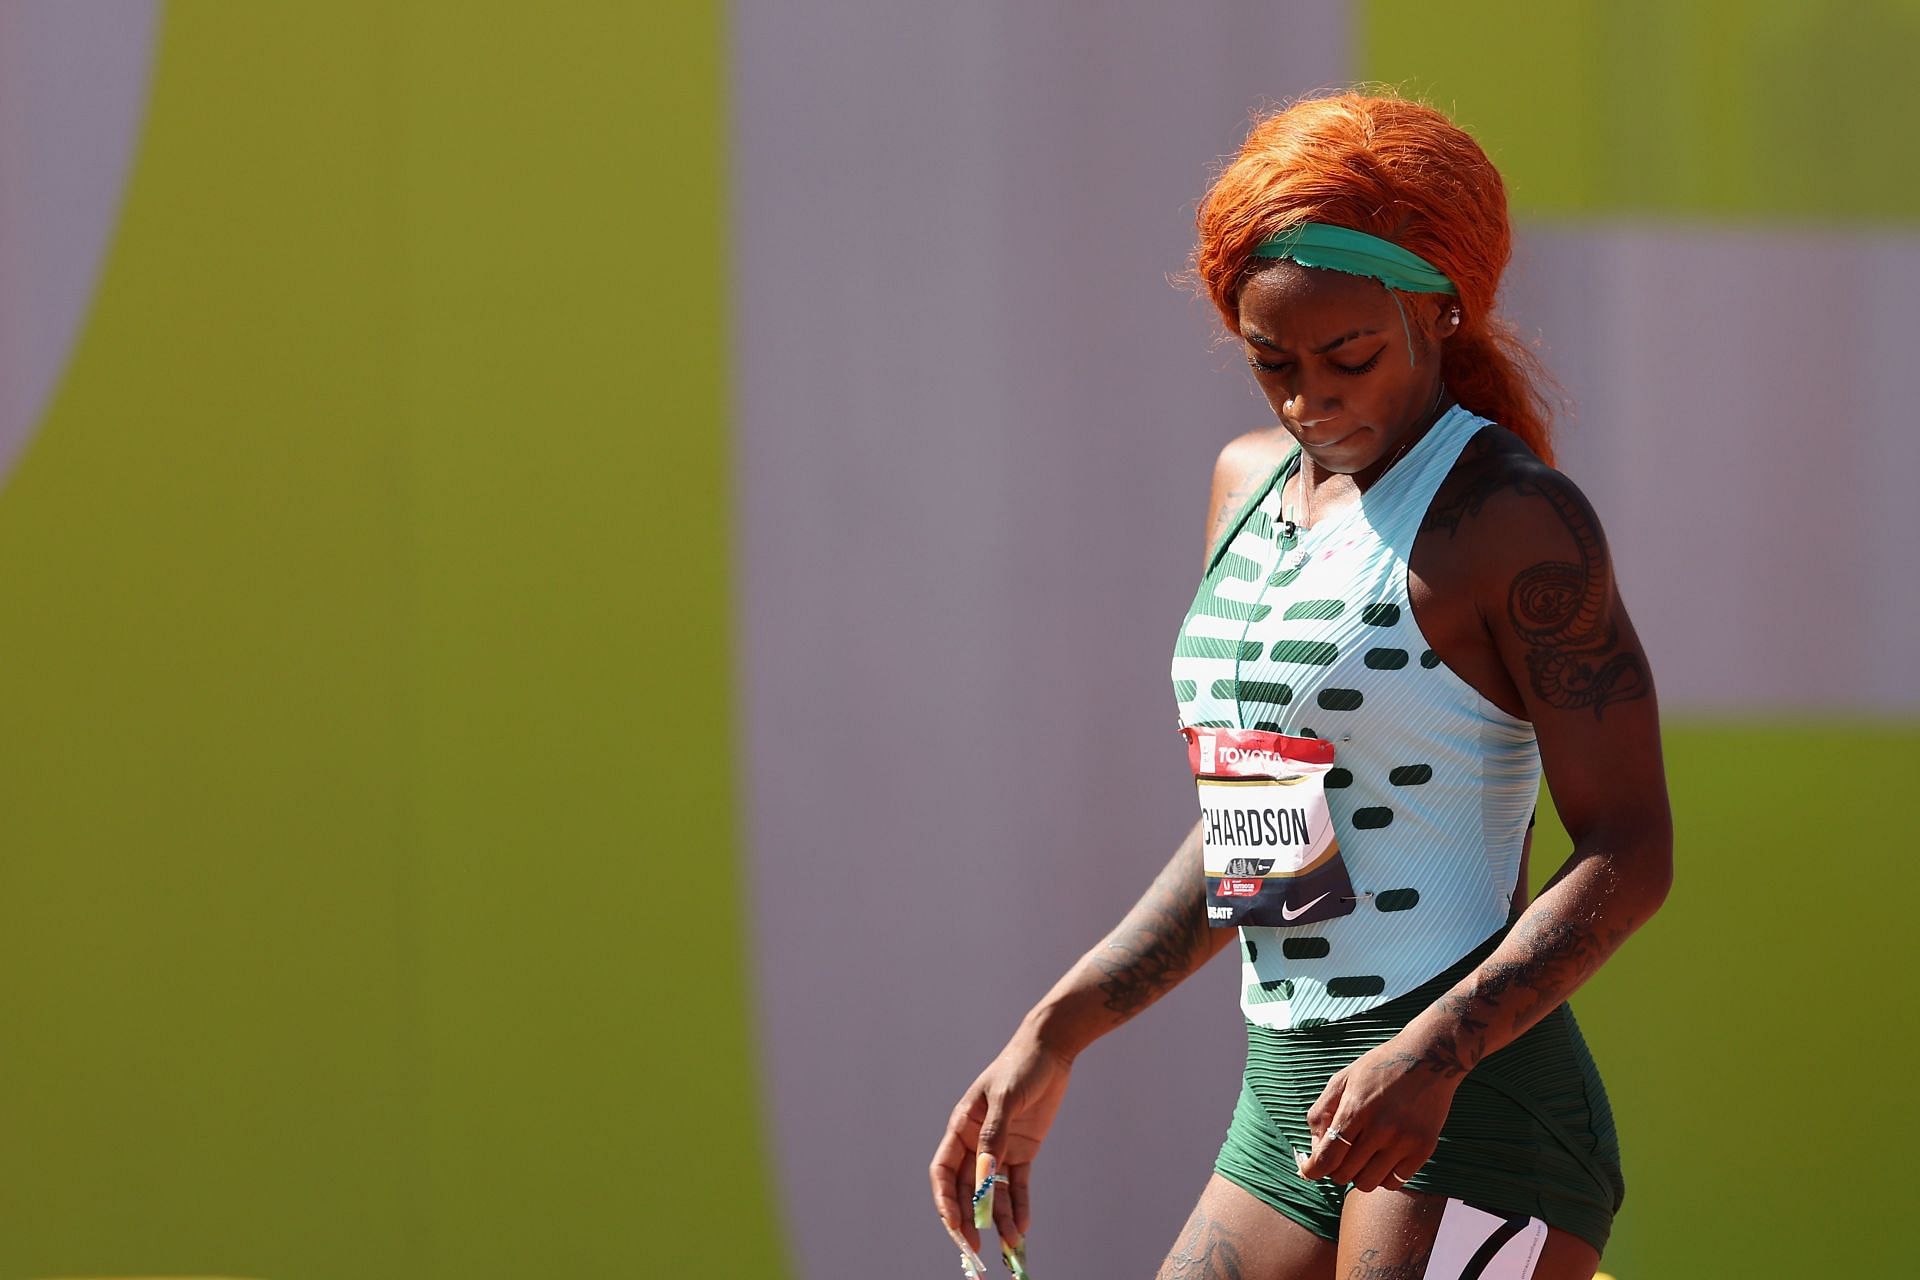 Richardson at the 2023 USATF Outdoor Championships